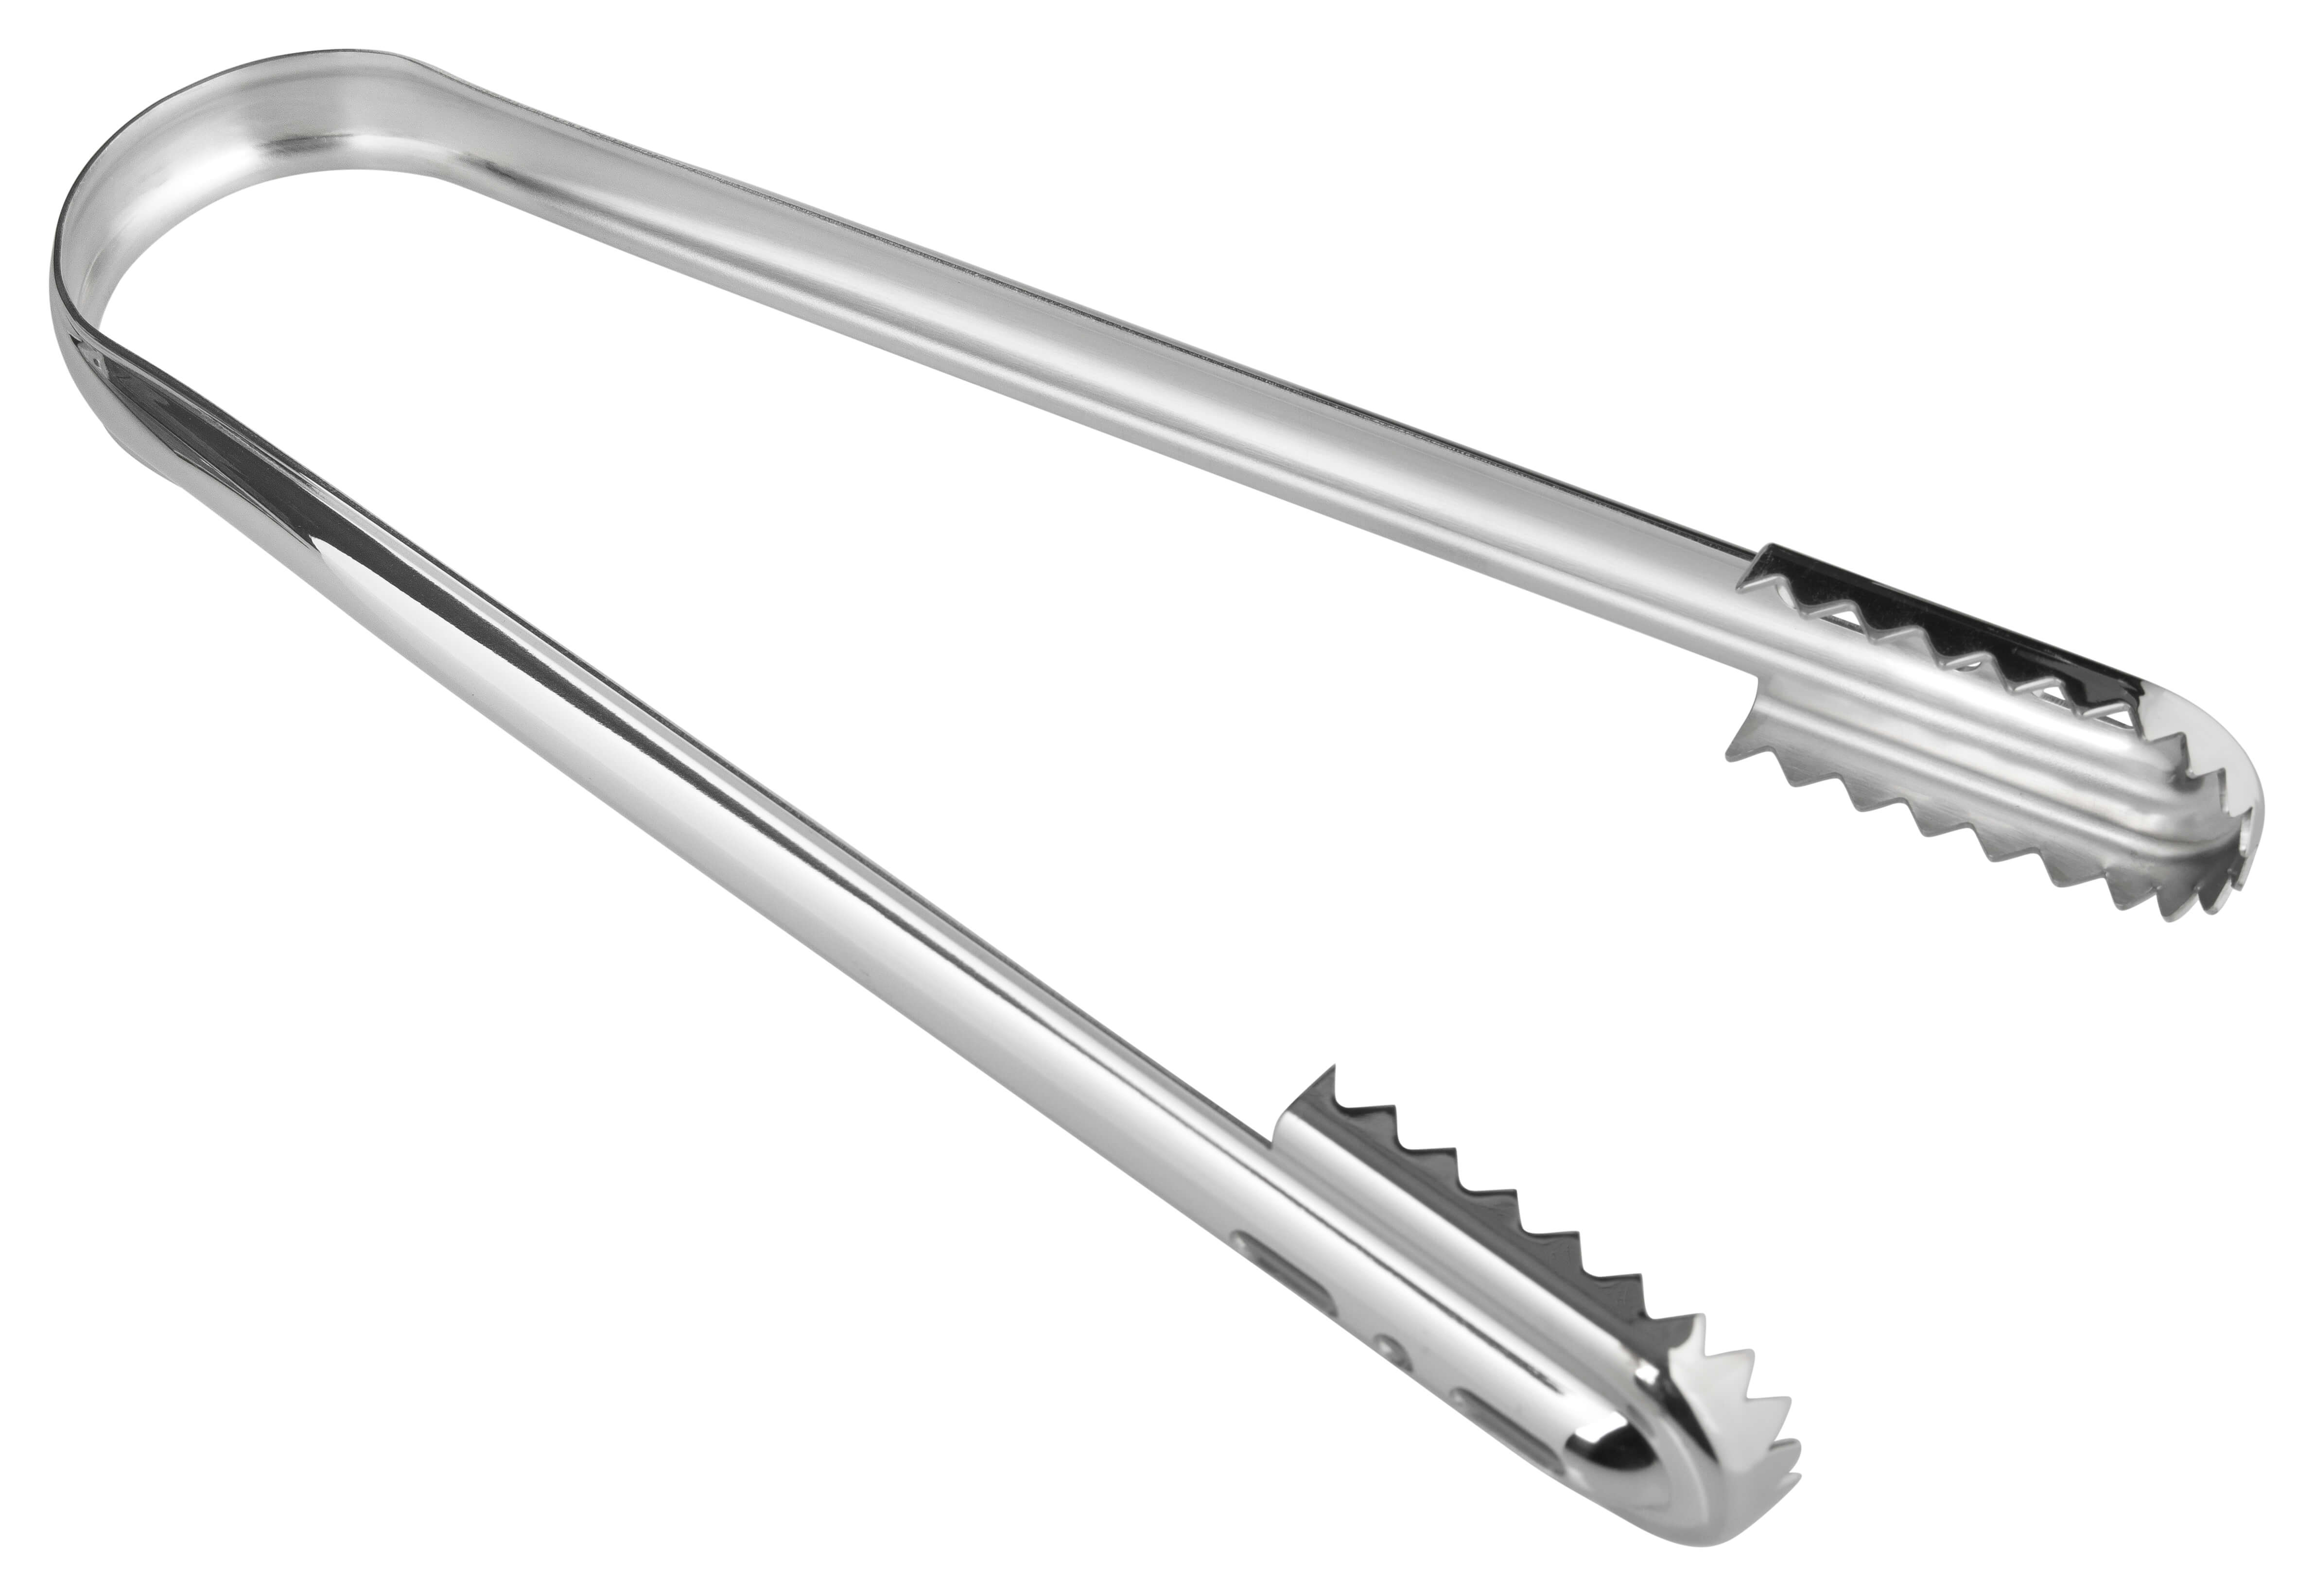 Ice tongs "5055", Alessi - stainless steel (21,5cm)